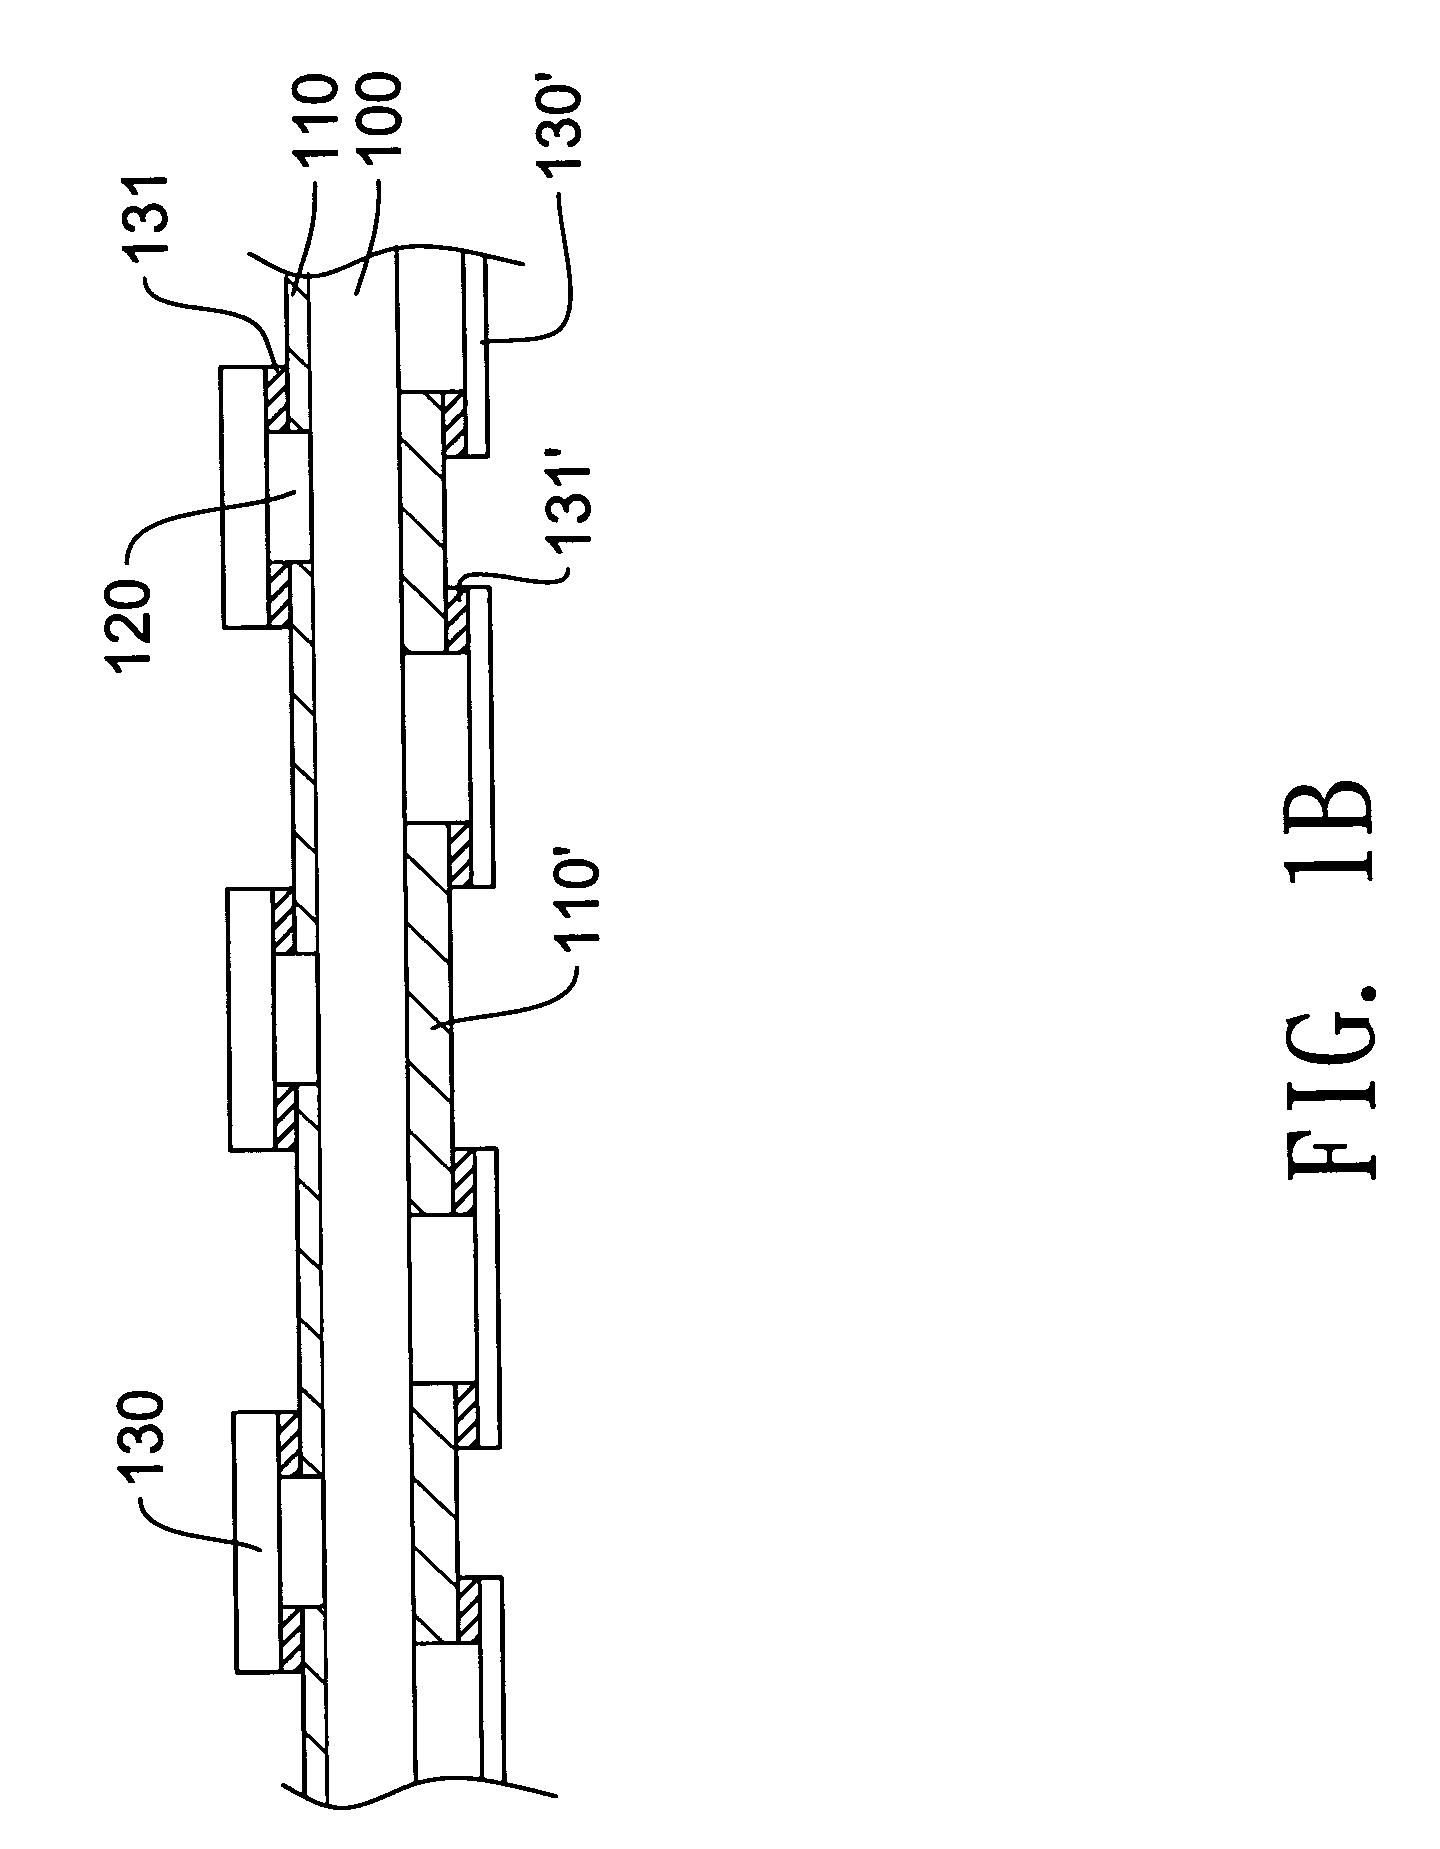 Plane structure of light-emitting diode lighting apparatus